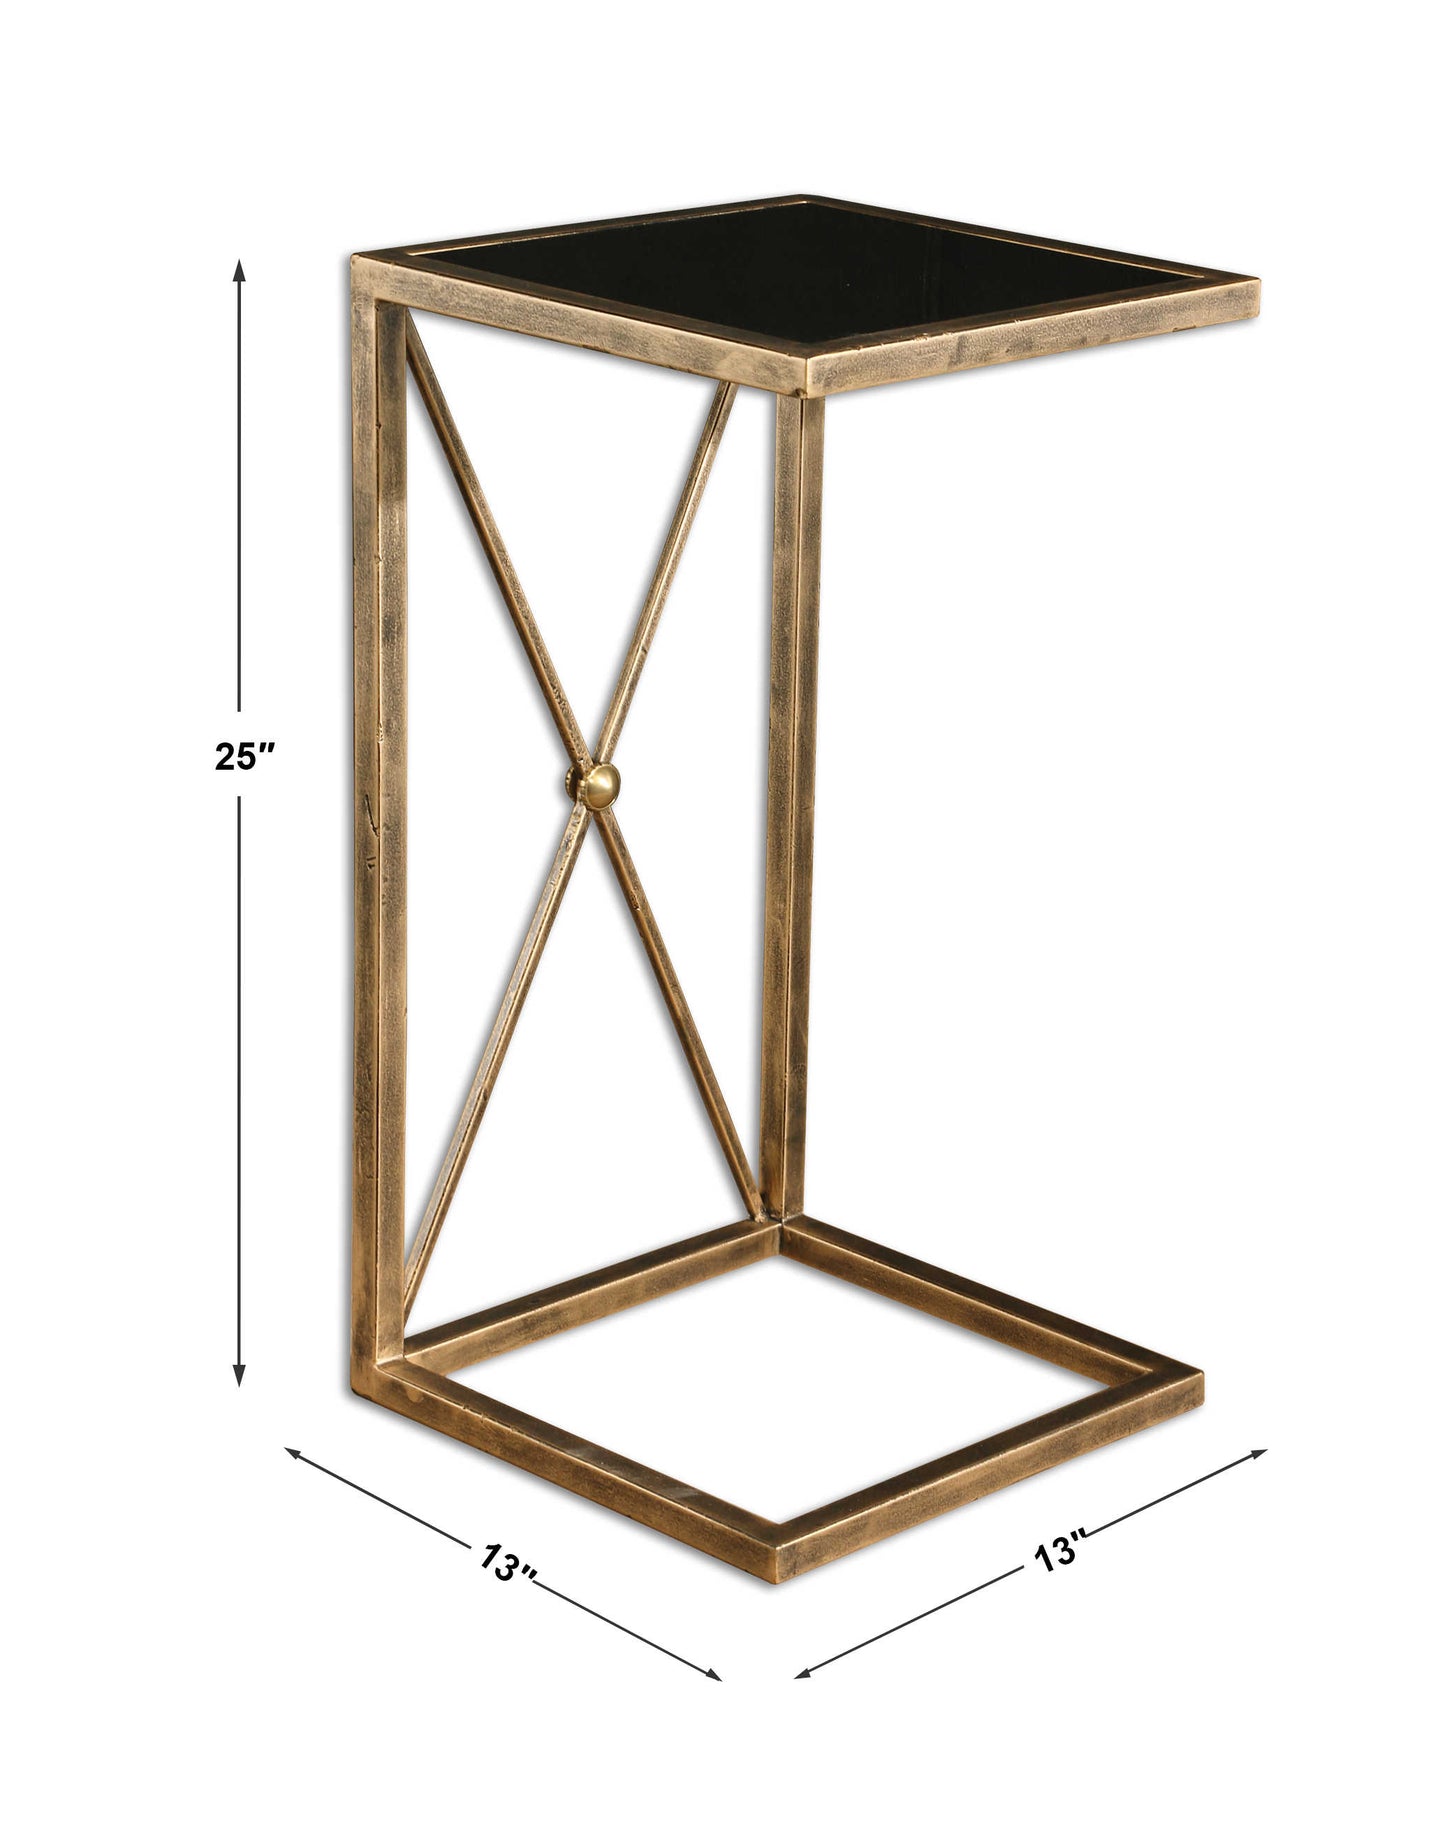 Classic Modern Coffee Table with Geometric Designs